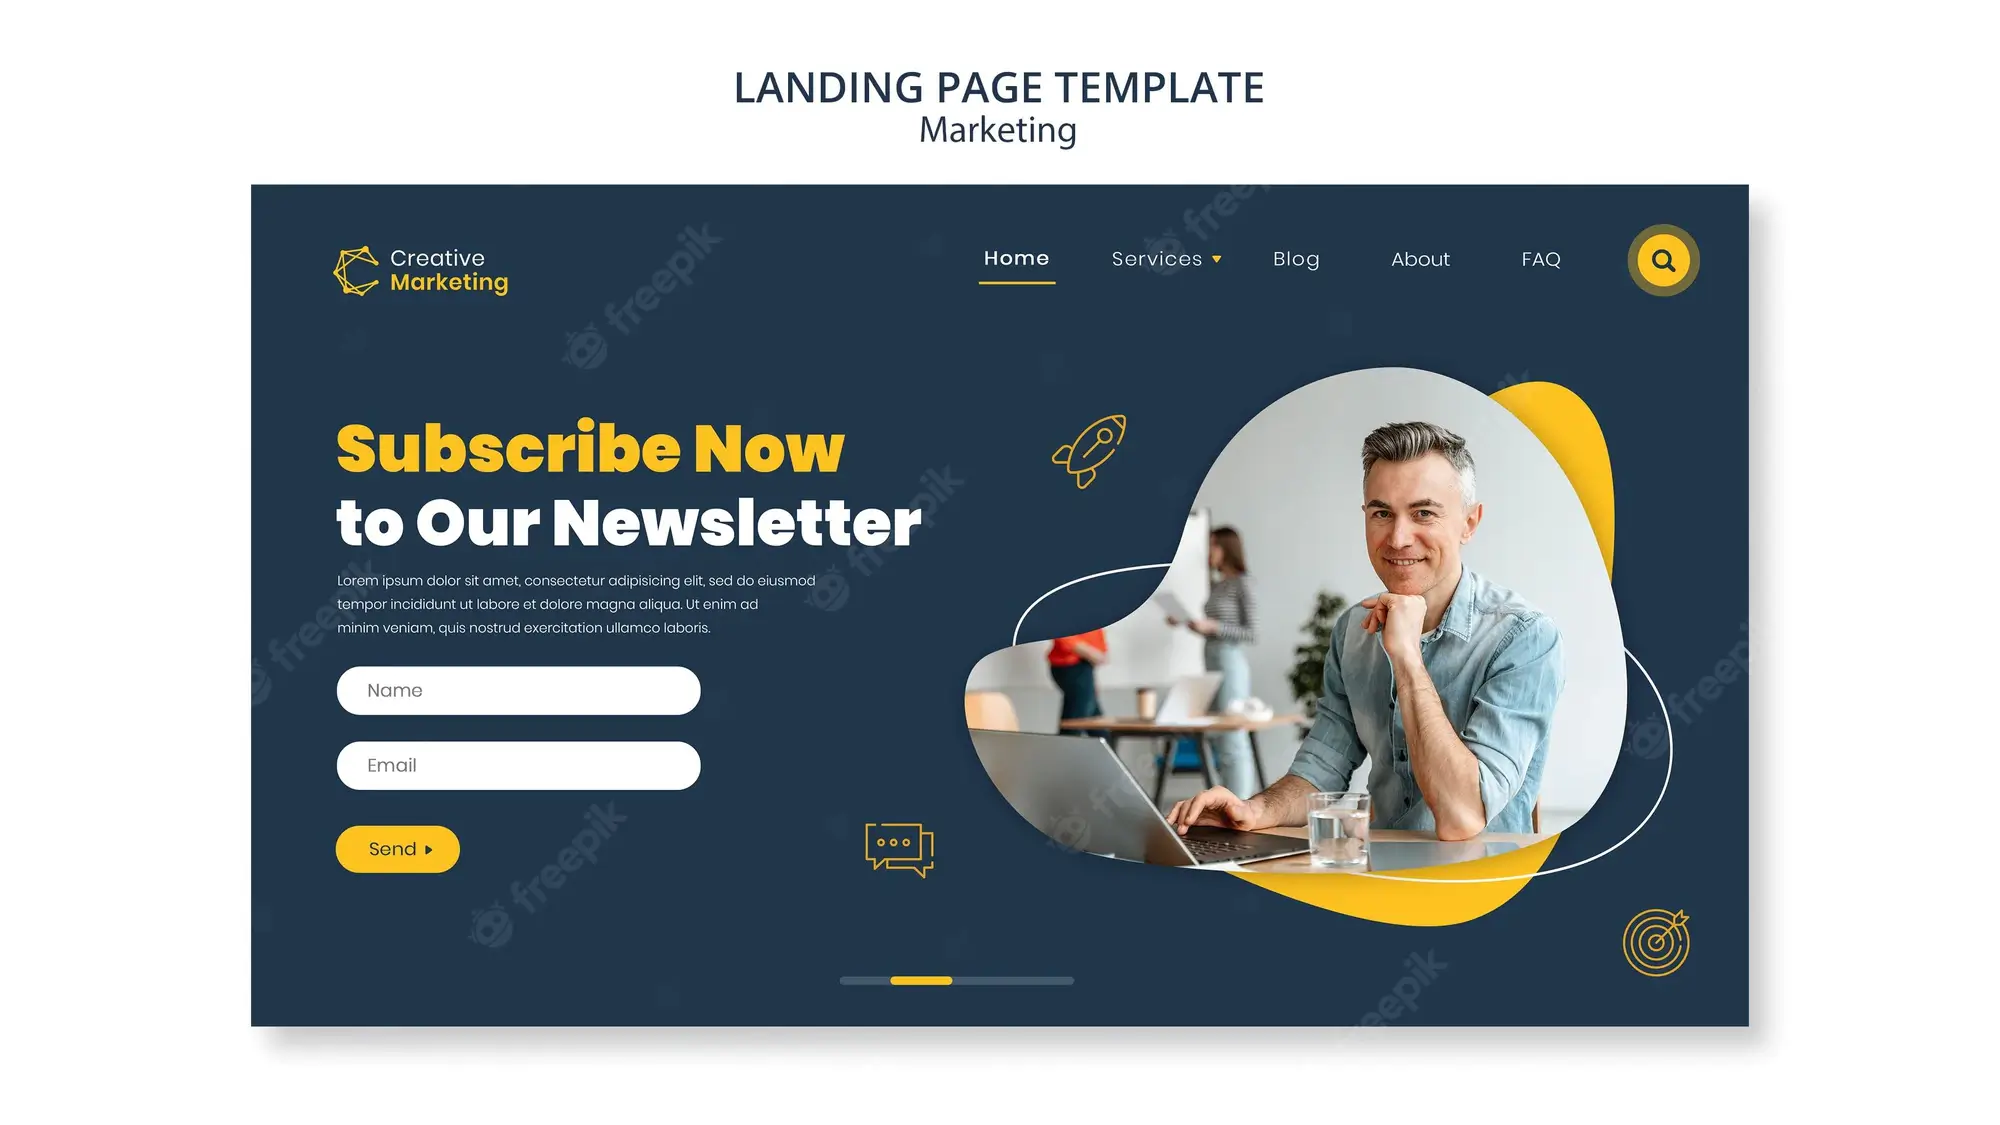  Landing page template